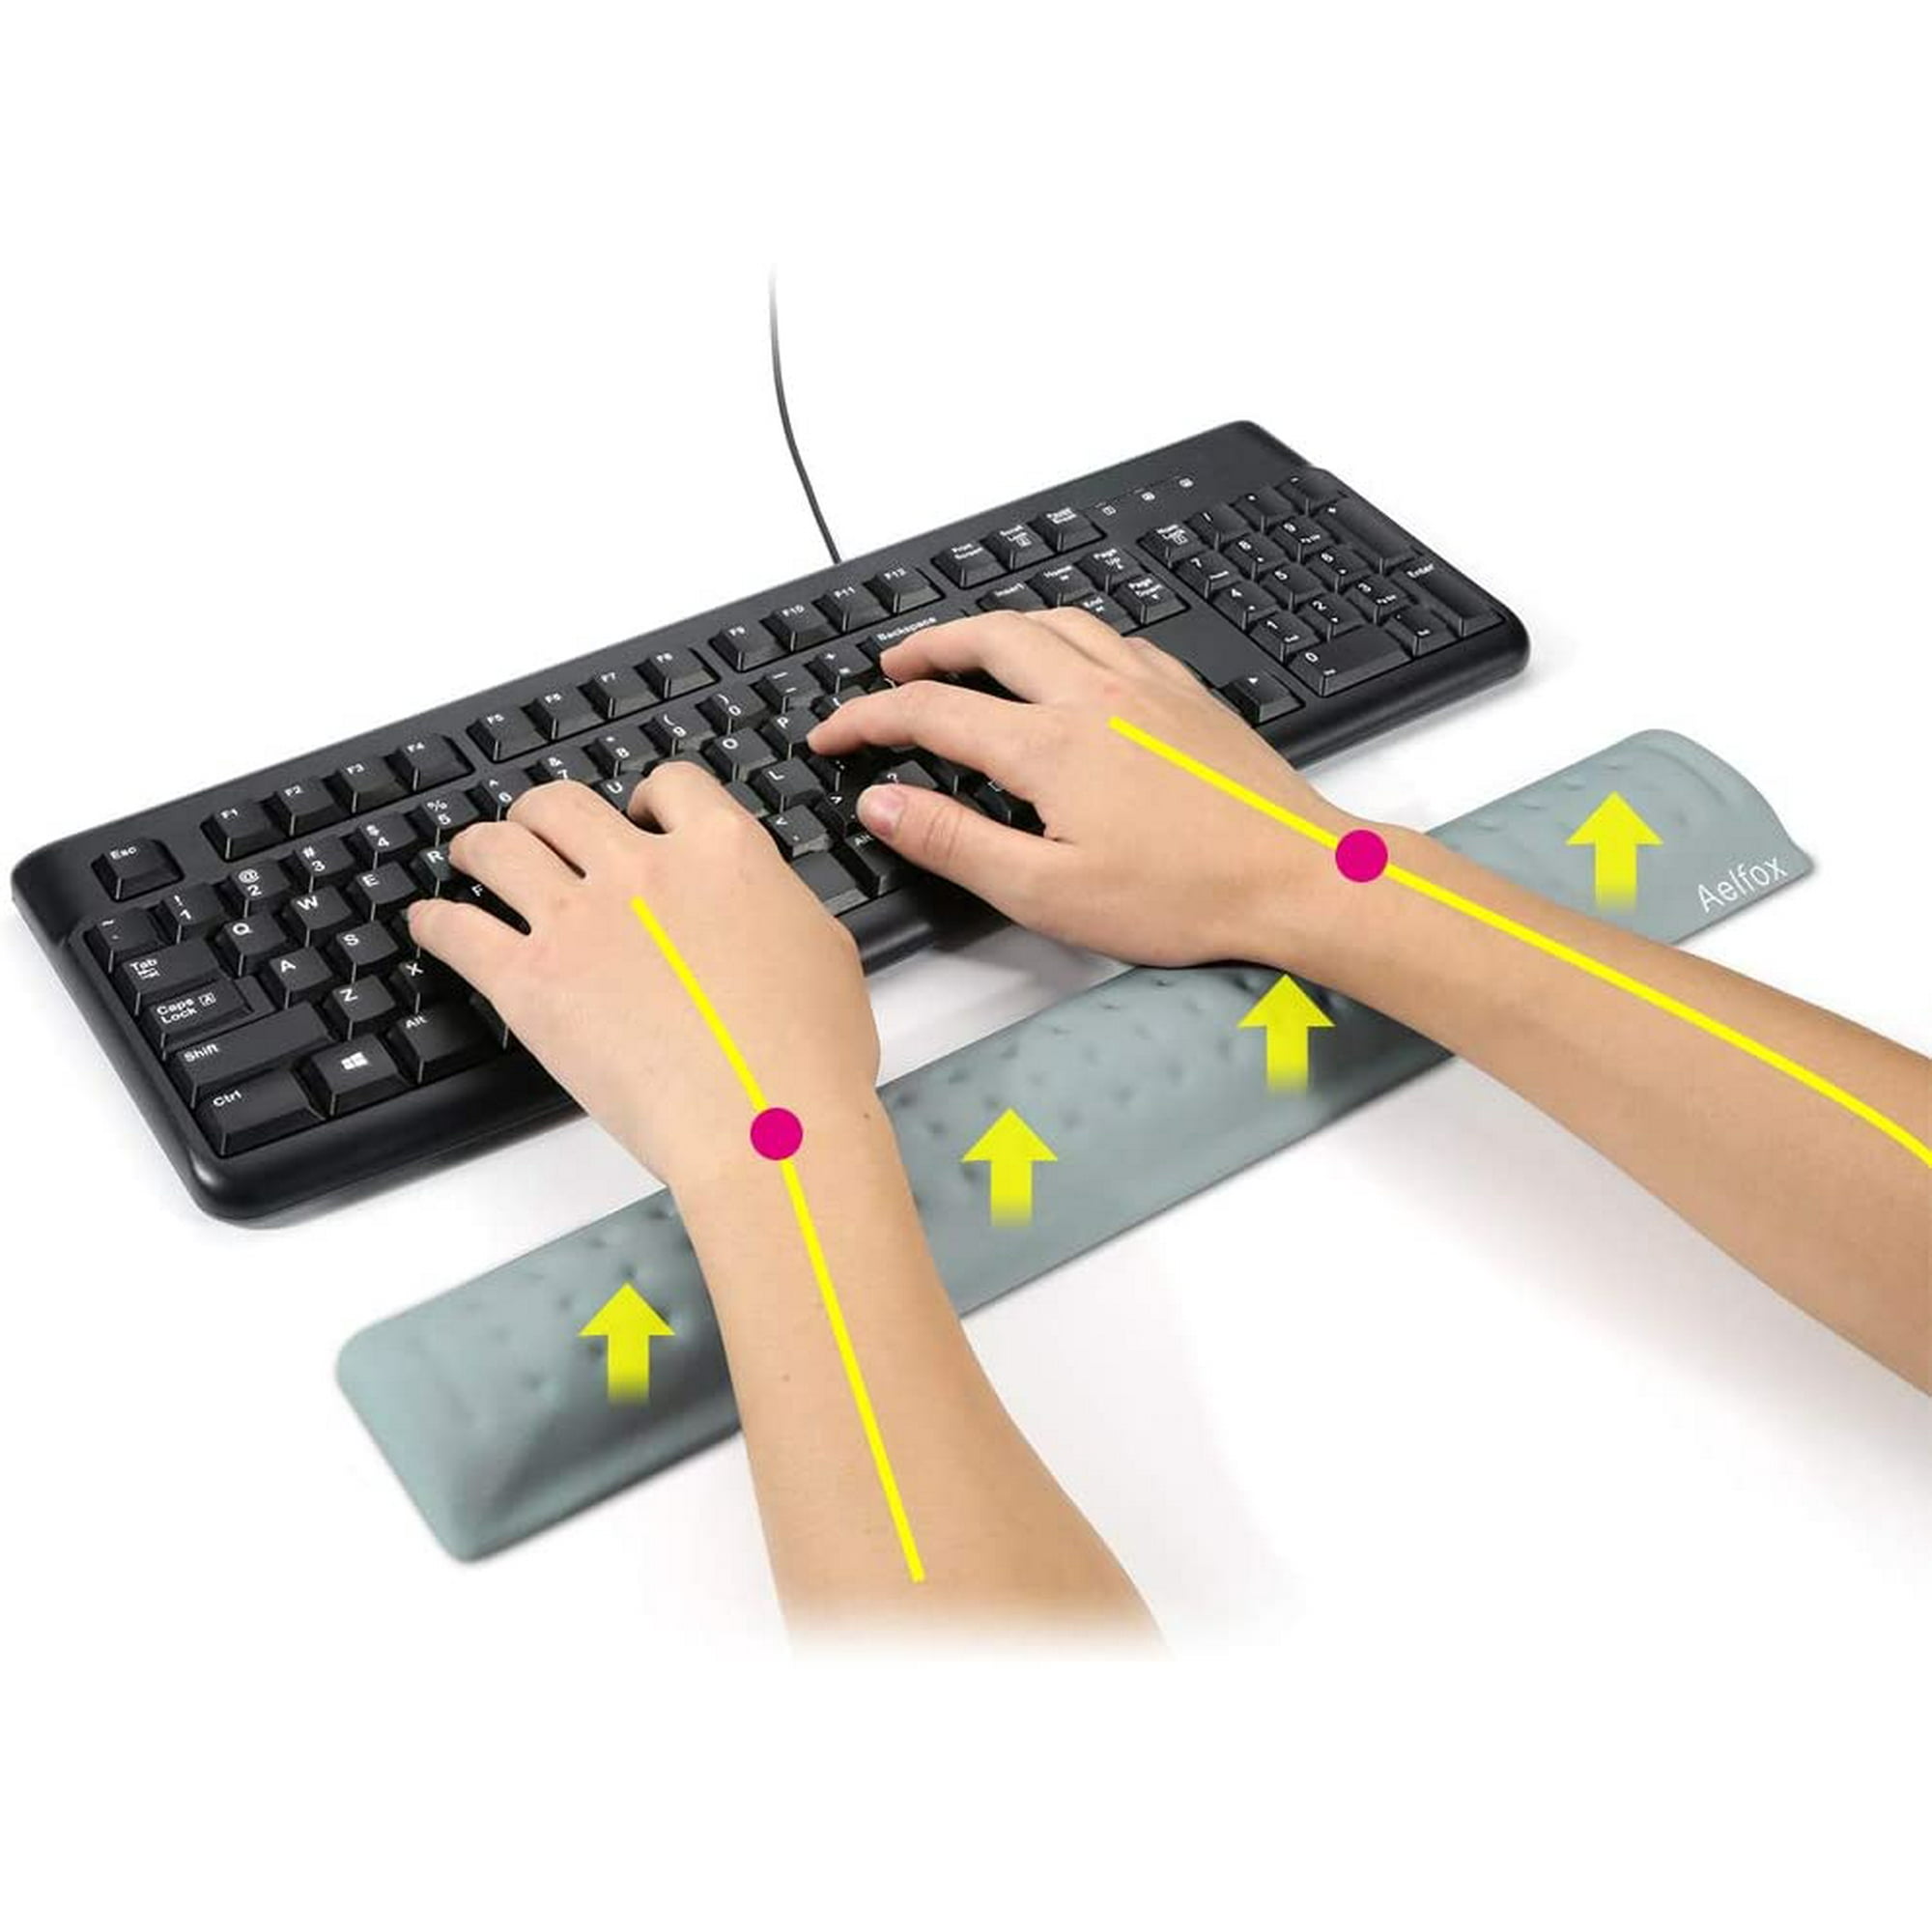 Memory Foam Palm Rest for Productive Typing and Pain Relief Aelfox Ergonomic Keyboard Wrist Rest and Mouse Pad Wrist Support